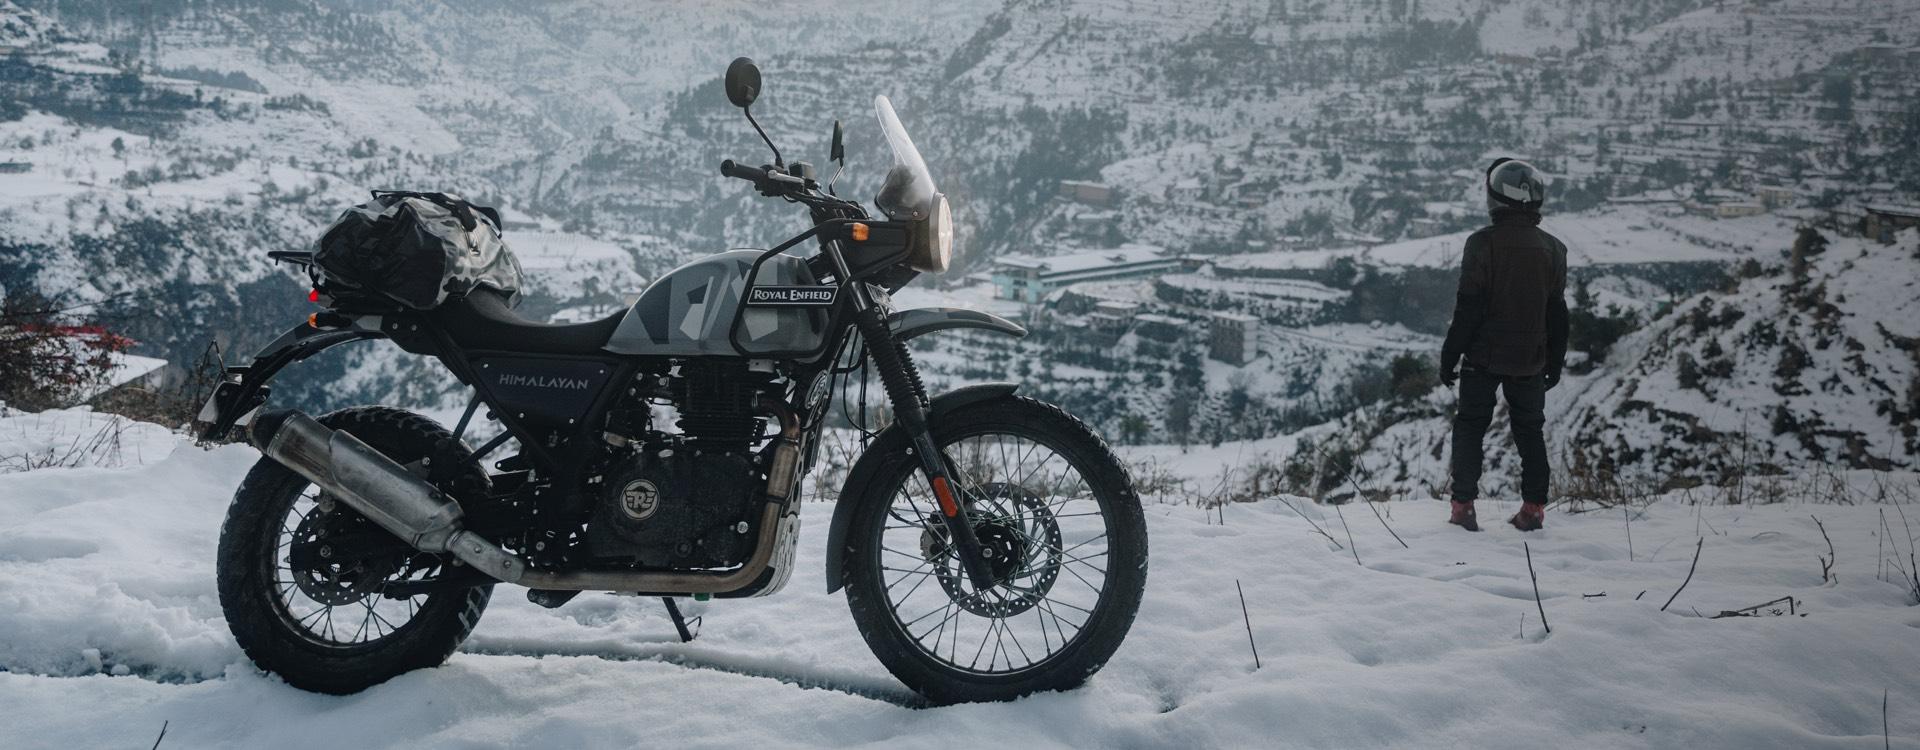 Himalayan 411 CC, Specifications, Reviews, Gallery